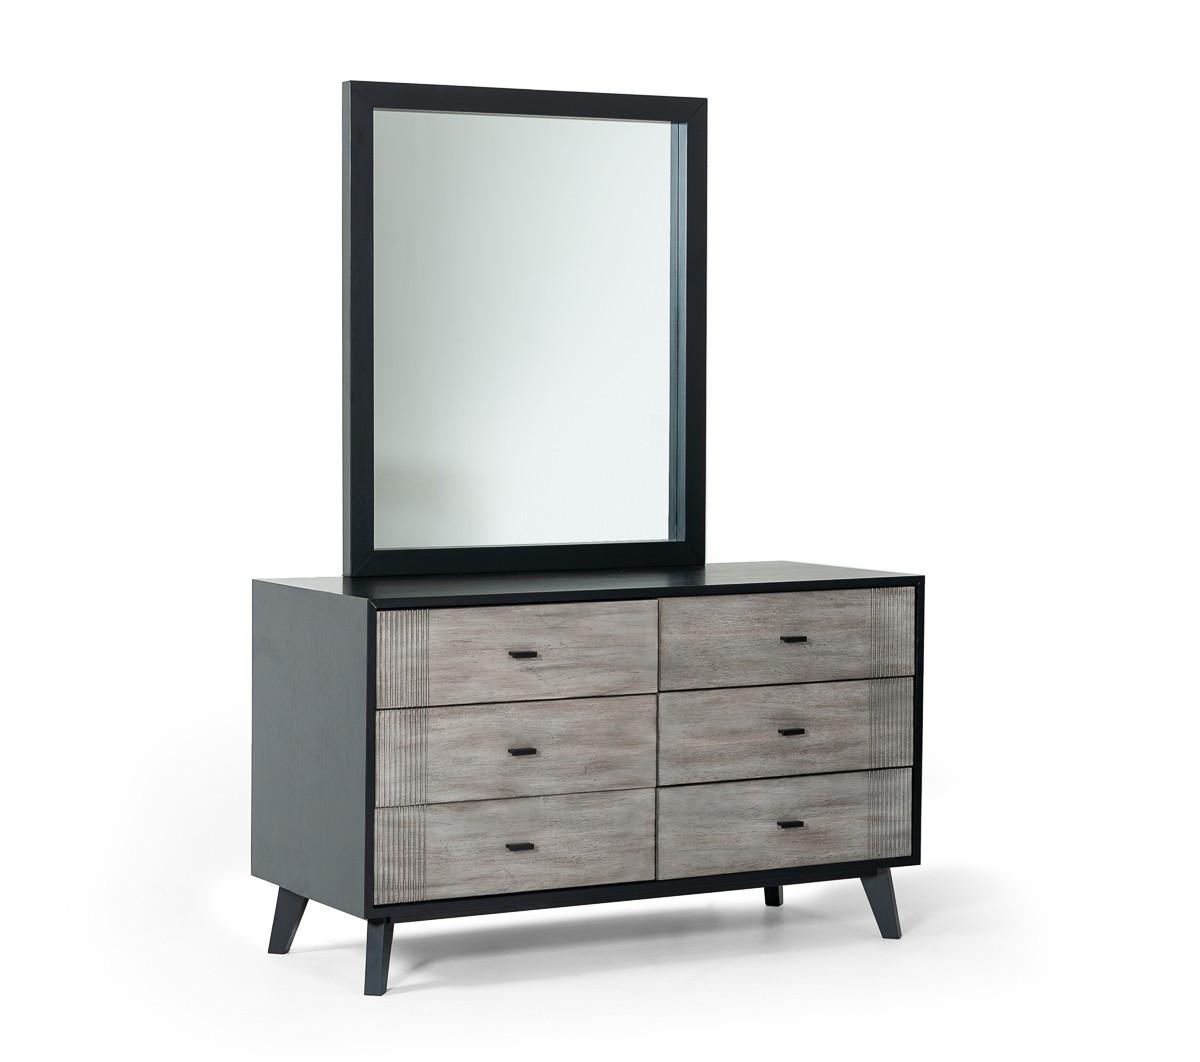 PalaceDesigns 40 x 34 x 1 in. Black Ash Veneer Rectangle Wall Mounted Dresser Mirror with Engineered Wood Framed